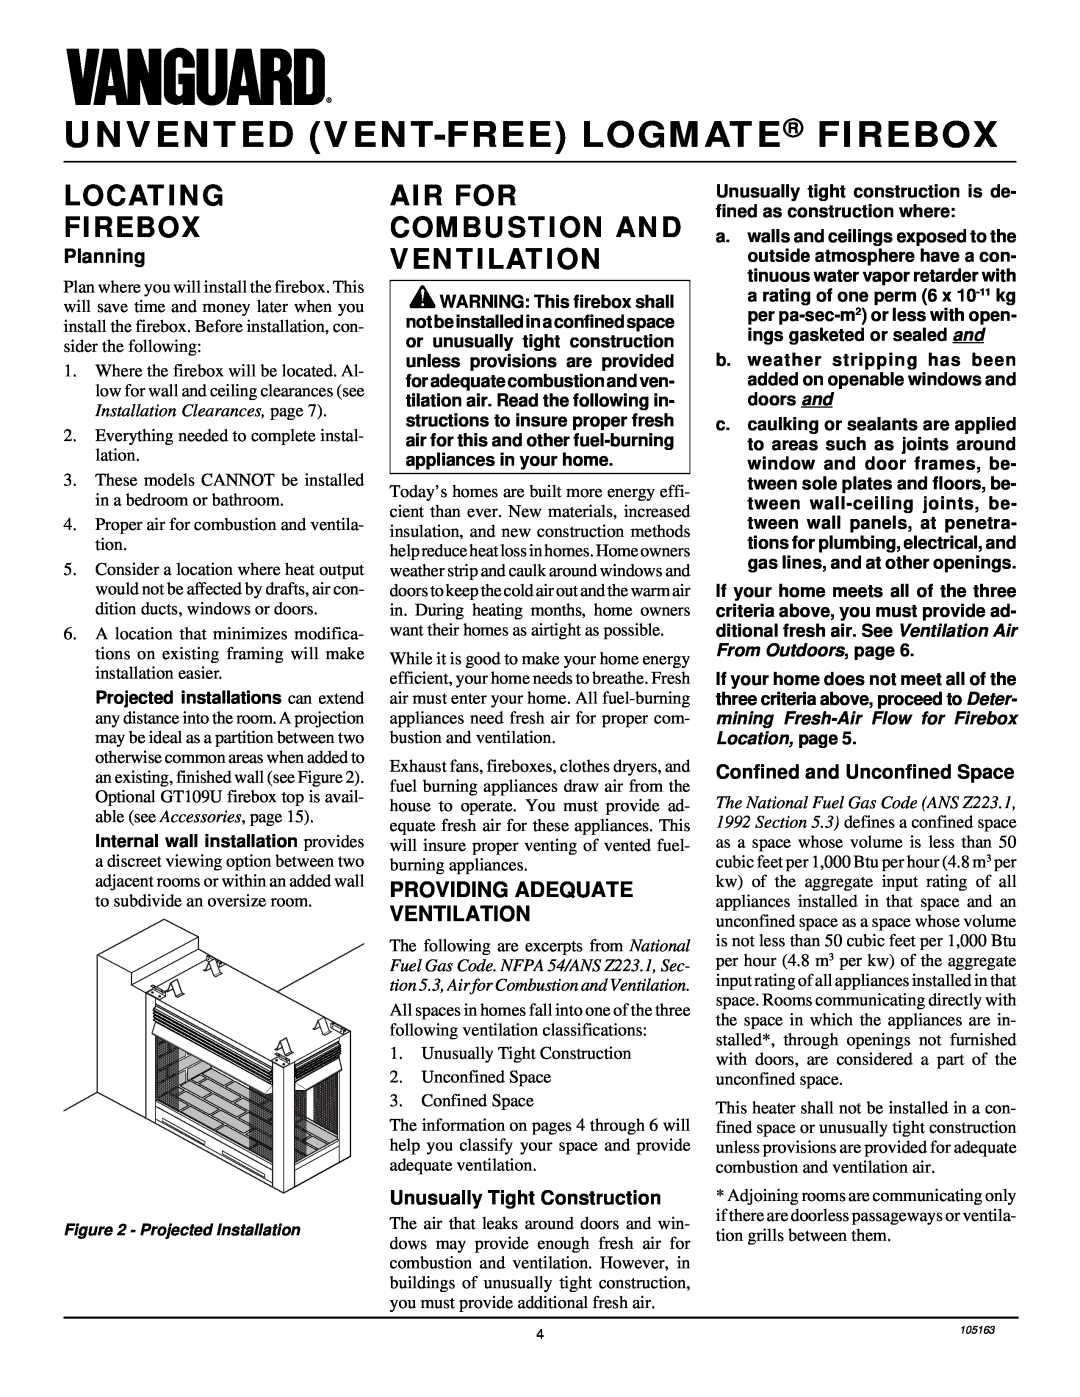 Desa FBPS installation manual Locating Firebox, Air For Combustion And Ventilation, Unvented Vent-Freelogmate Firebox 